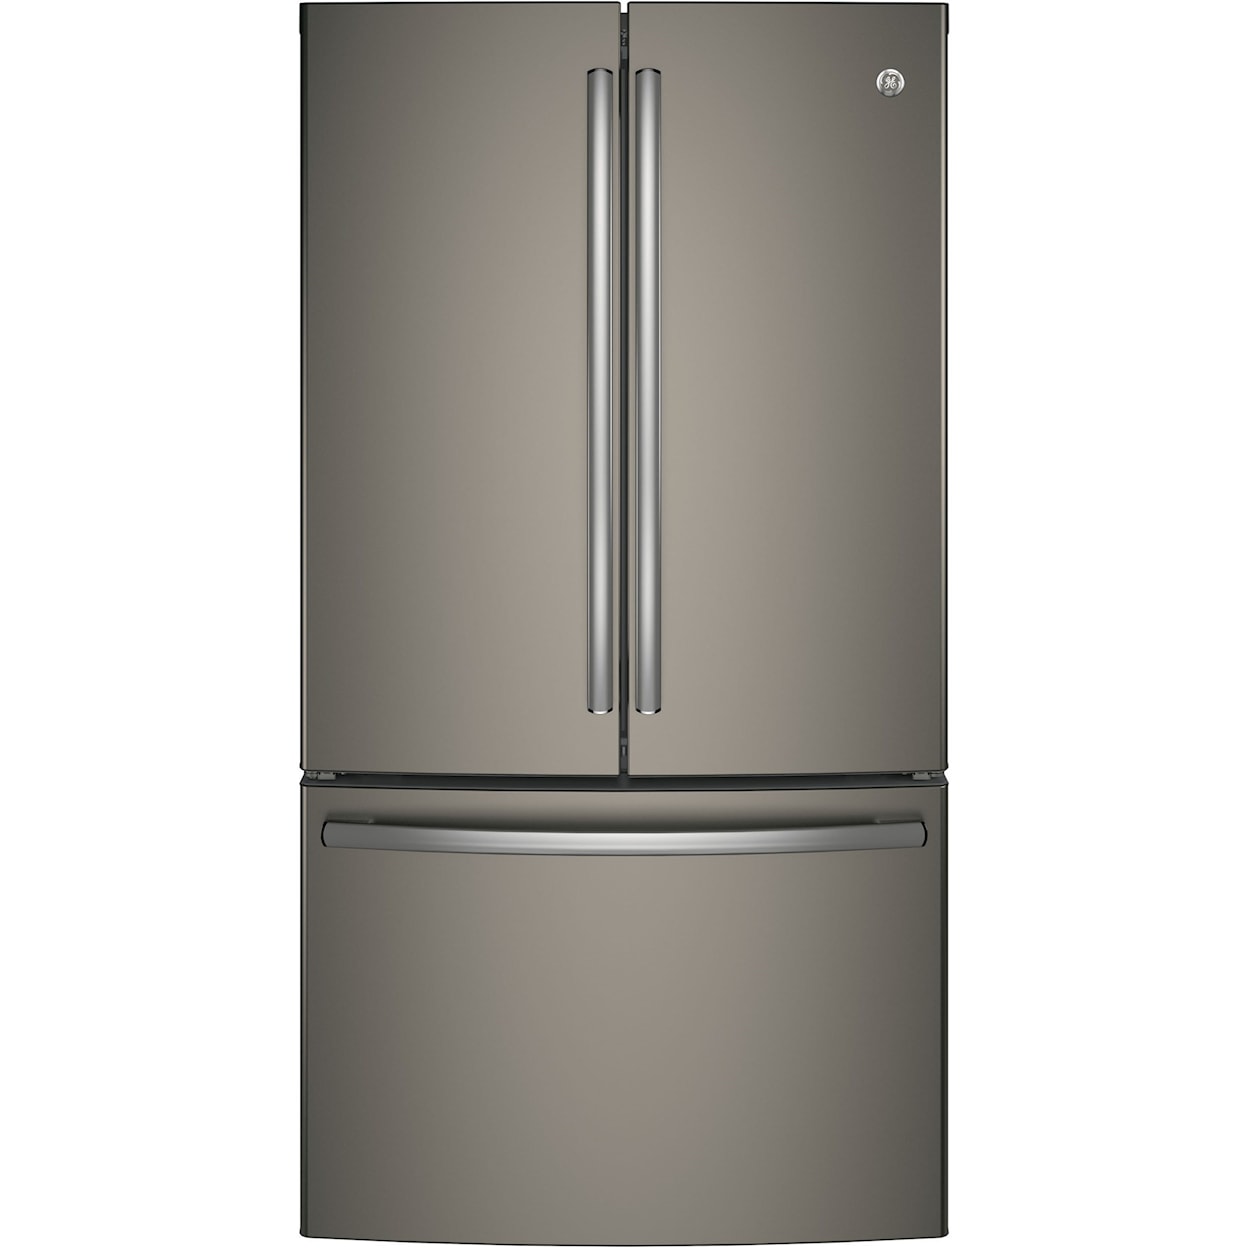 GE Appliances GE French Door Refrigerators GE® Series ENERGY STAR® 28.5 Cu. Ft. French-